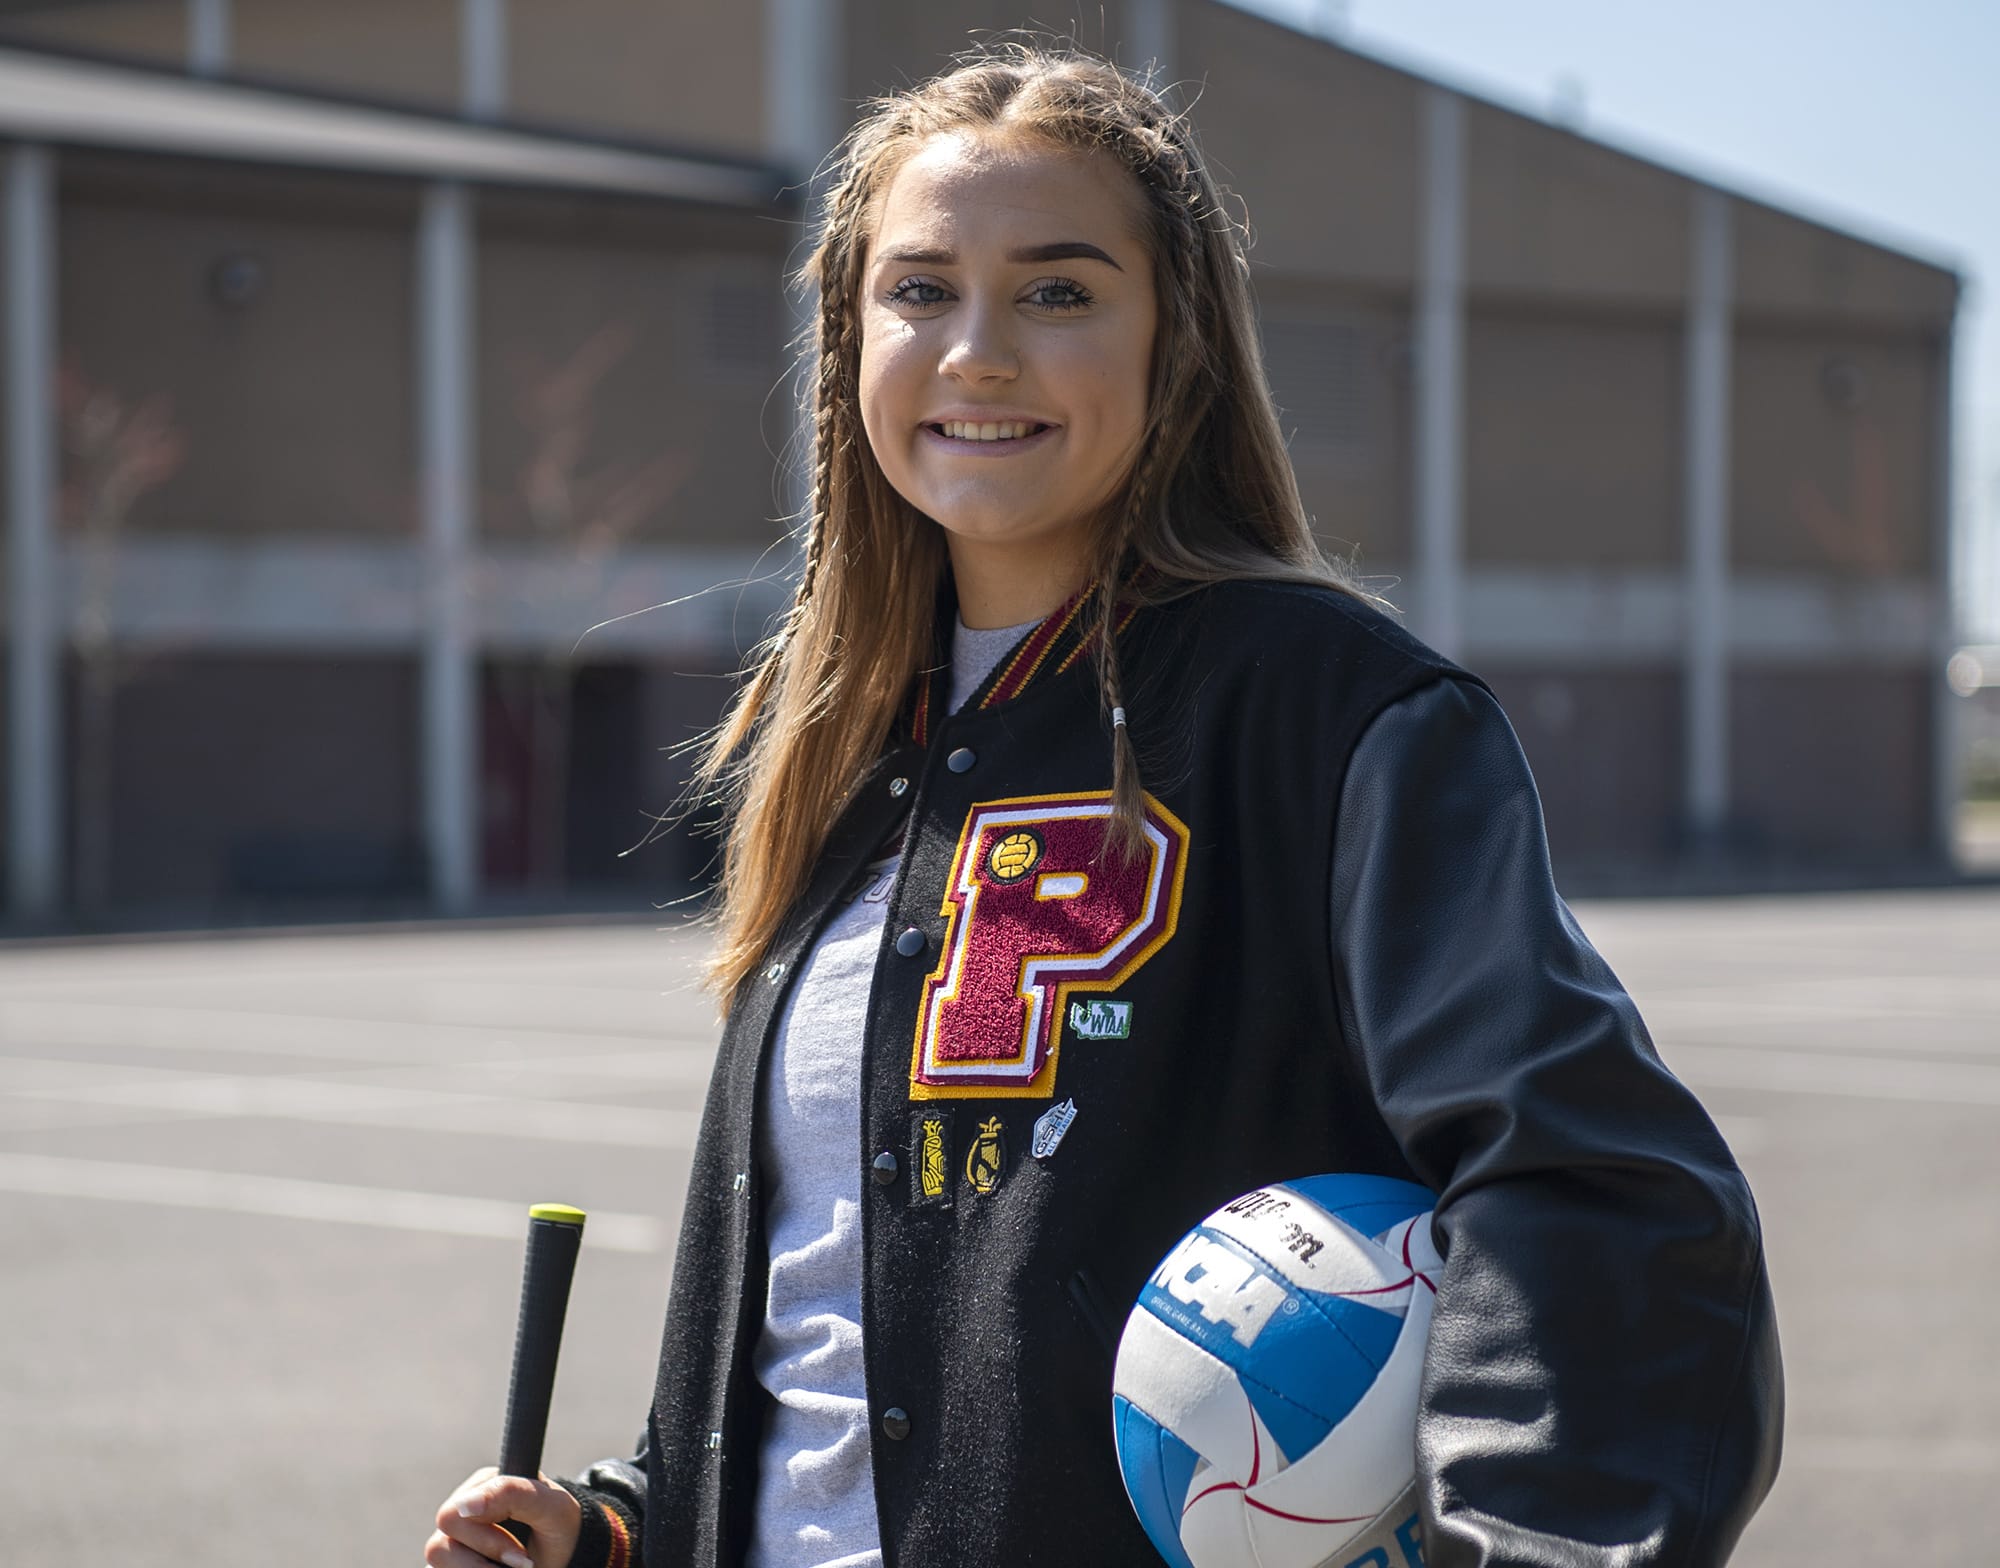 Prairie High School senior Amelia Renner is pictured at the school in Vancouver on Wednesday April 8, 2020.